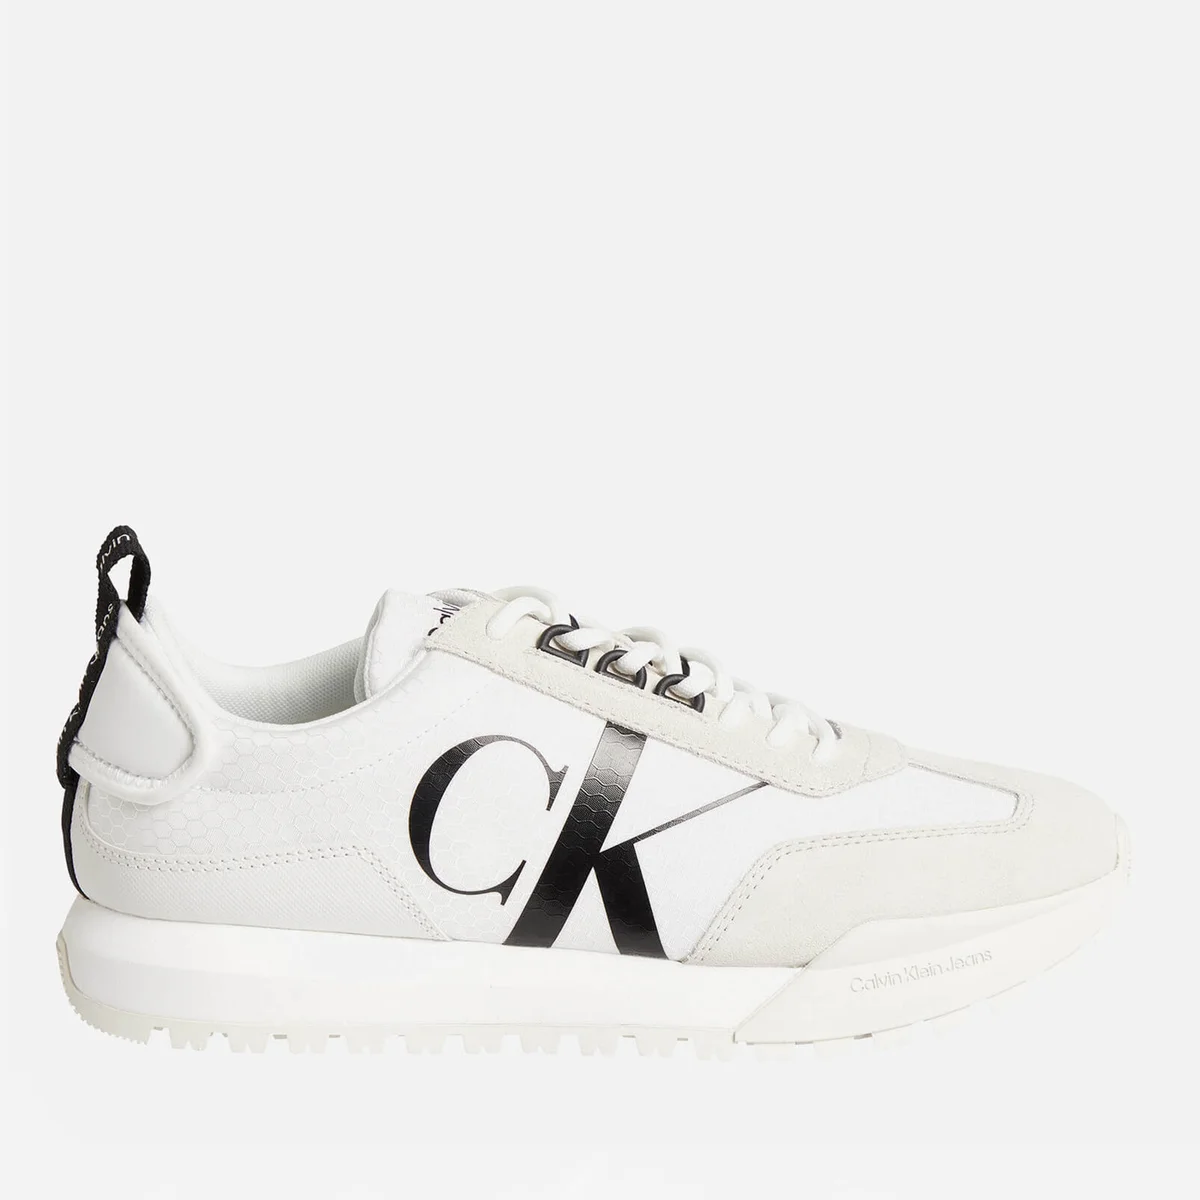 Calvin Klein Jeans Retro Running Style Trainers Image 1